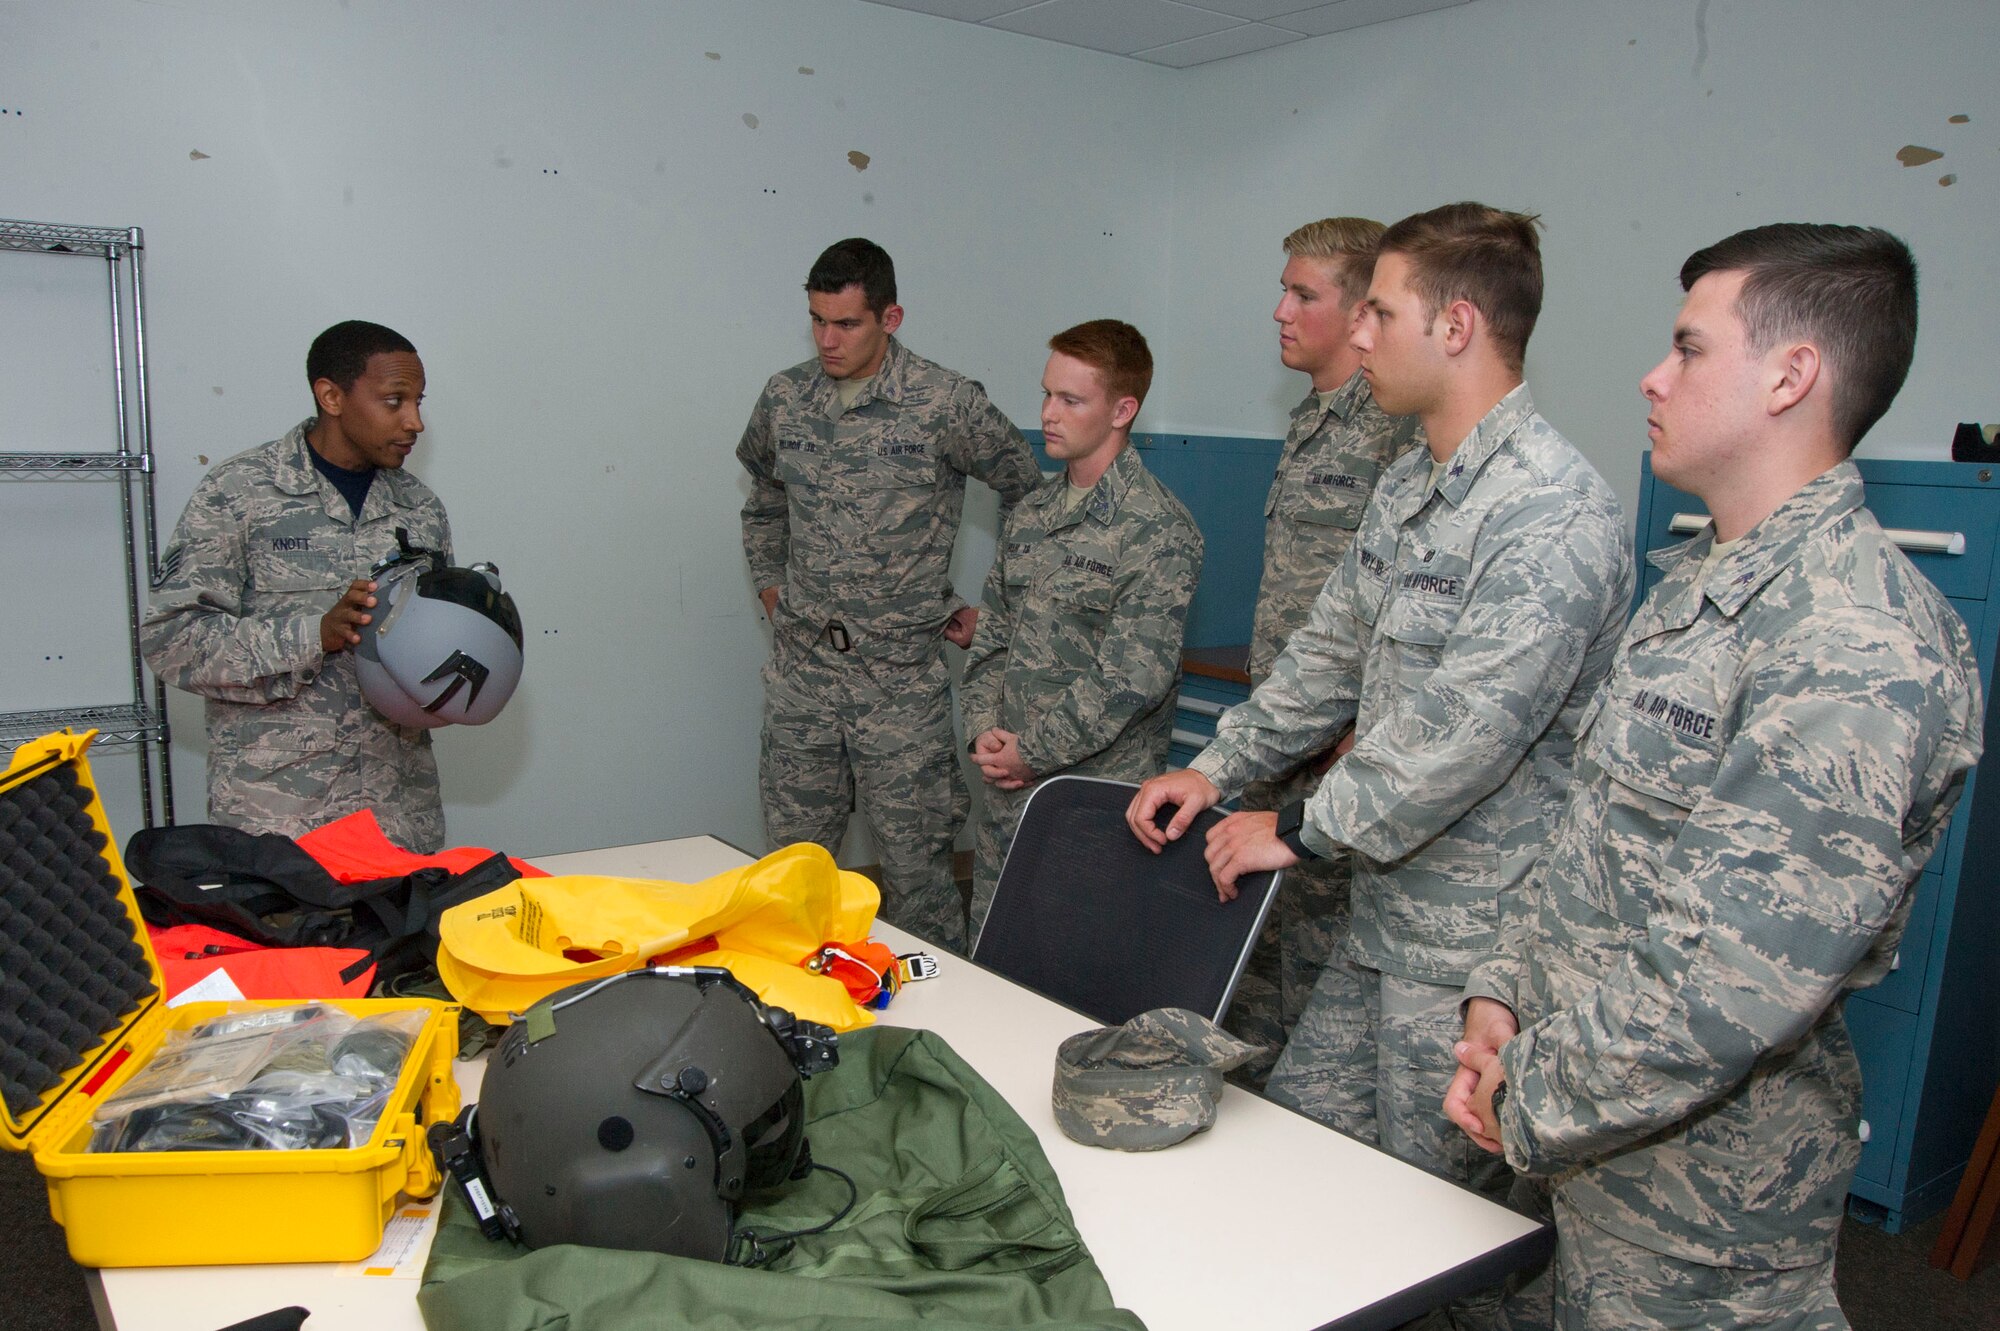 Staff Sgt. Dyral Knott  gives a group of U.S. Air Force Academy cadets a briefing and tour of the Aircrew Flight Equipment section during a tour of the 89th Operations Support Squadron at Joint Base Andrews, Md. The cadets visited the base as part of the U.S. Air Force Academy's Operations Air Force program. (Photo by U.S. Air Force Senior Master Sgt. Adrian Cadiz)
	
